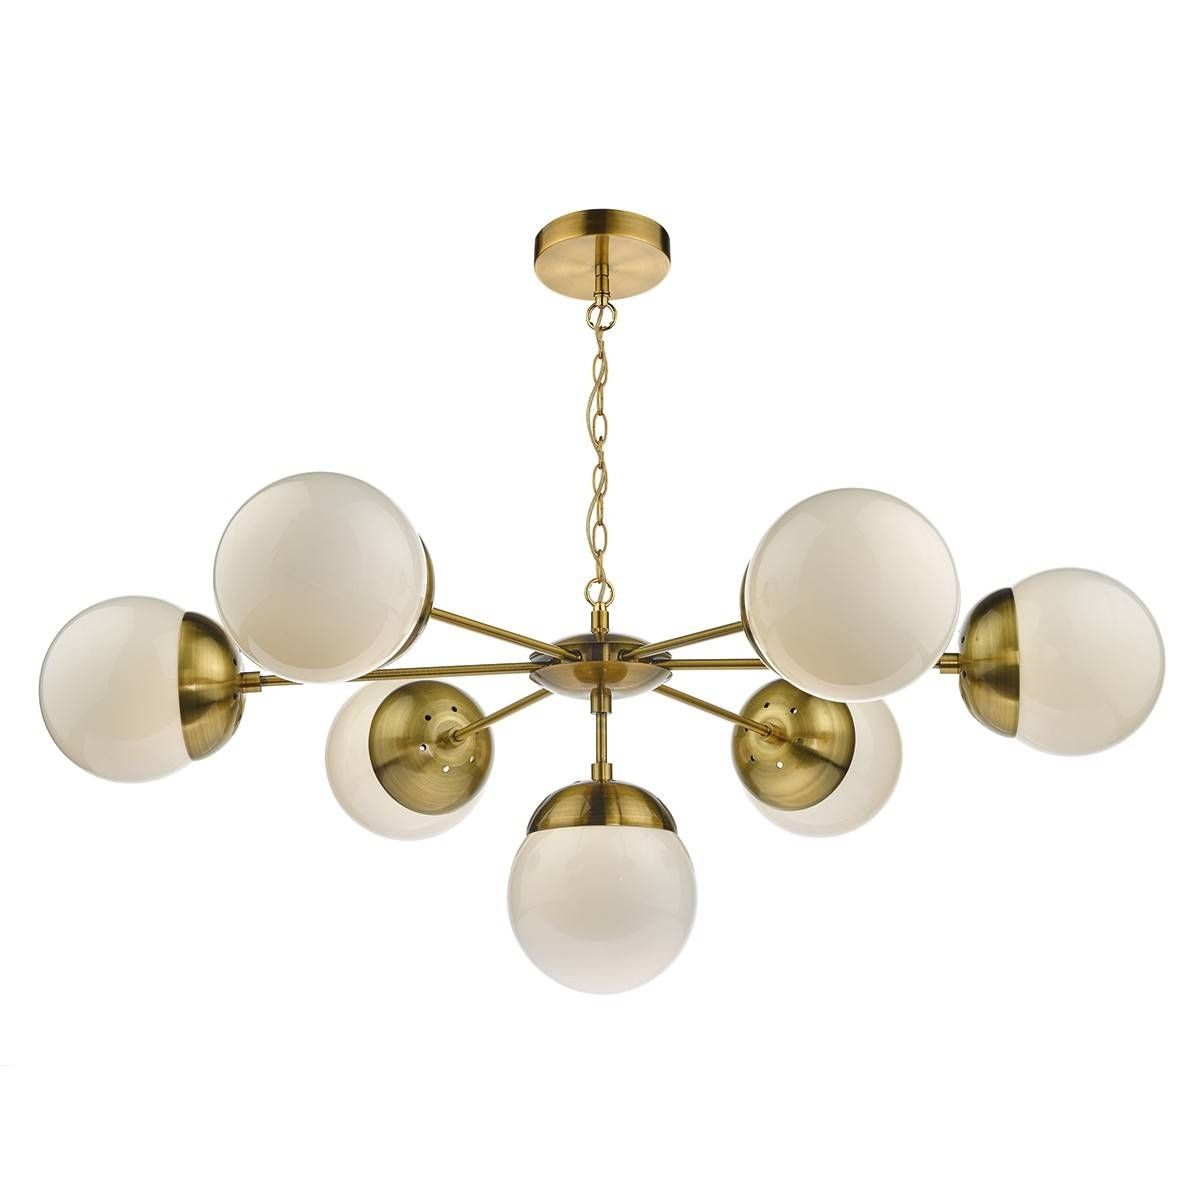 Multi Arm Light Fittings – Ceiling Lighting – Hospitality Lighting With Regard To Multi Arm Pendant Lights (View 1 of 15)